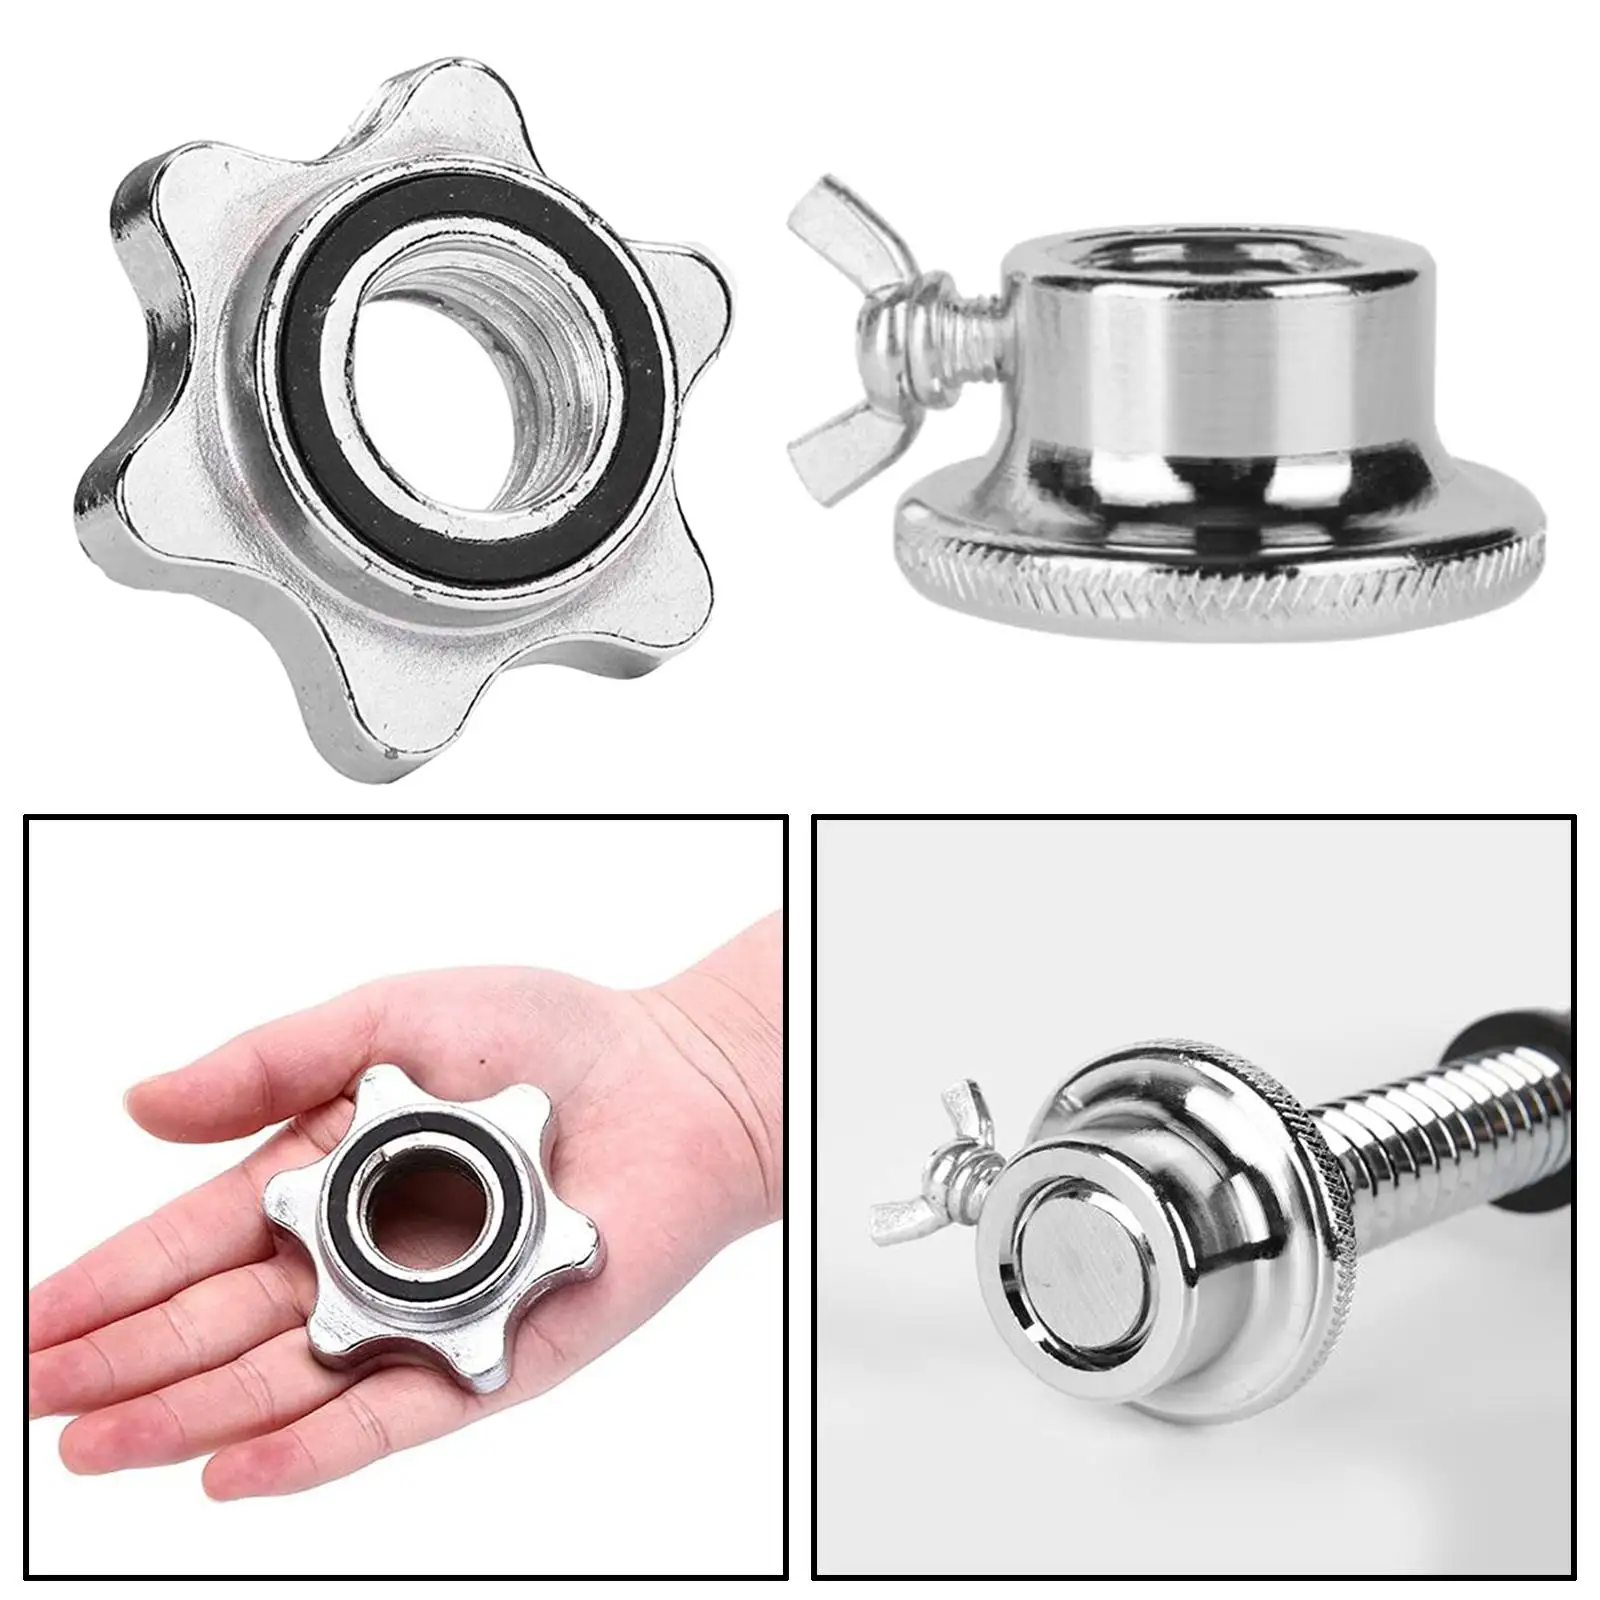 Stainless Steel Hex Nuts,-Lock Collar Screw for Barbell Dumbell Weight Lifting 2.5cm (Silver)